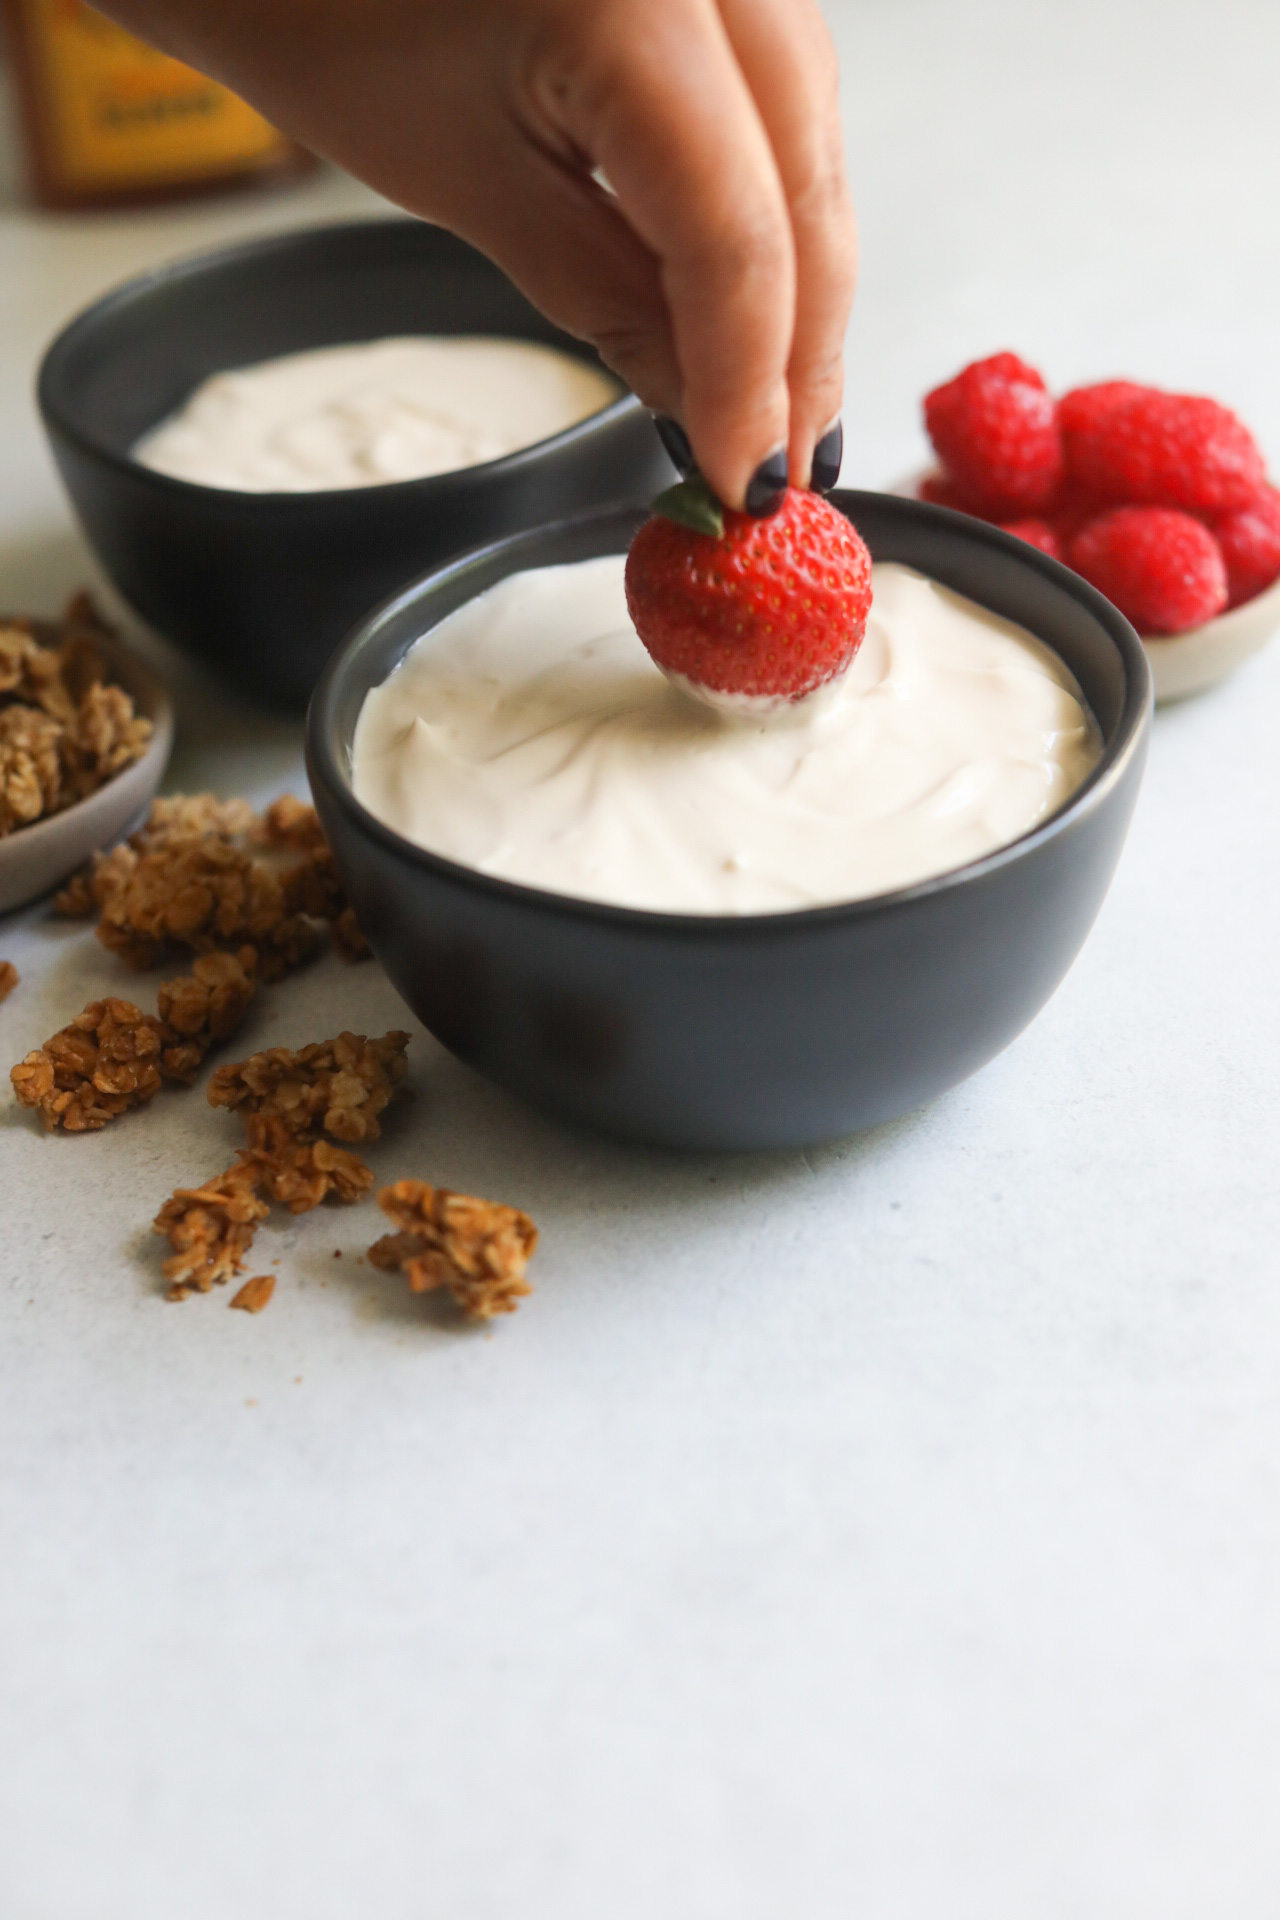 Hand dipping strawberry entirely into whipped yogurt bowl. Bowl is black with crumbled granola and a small bowl of raspberries added for styling purposes.